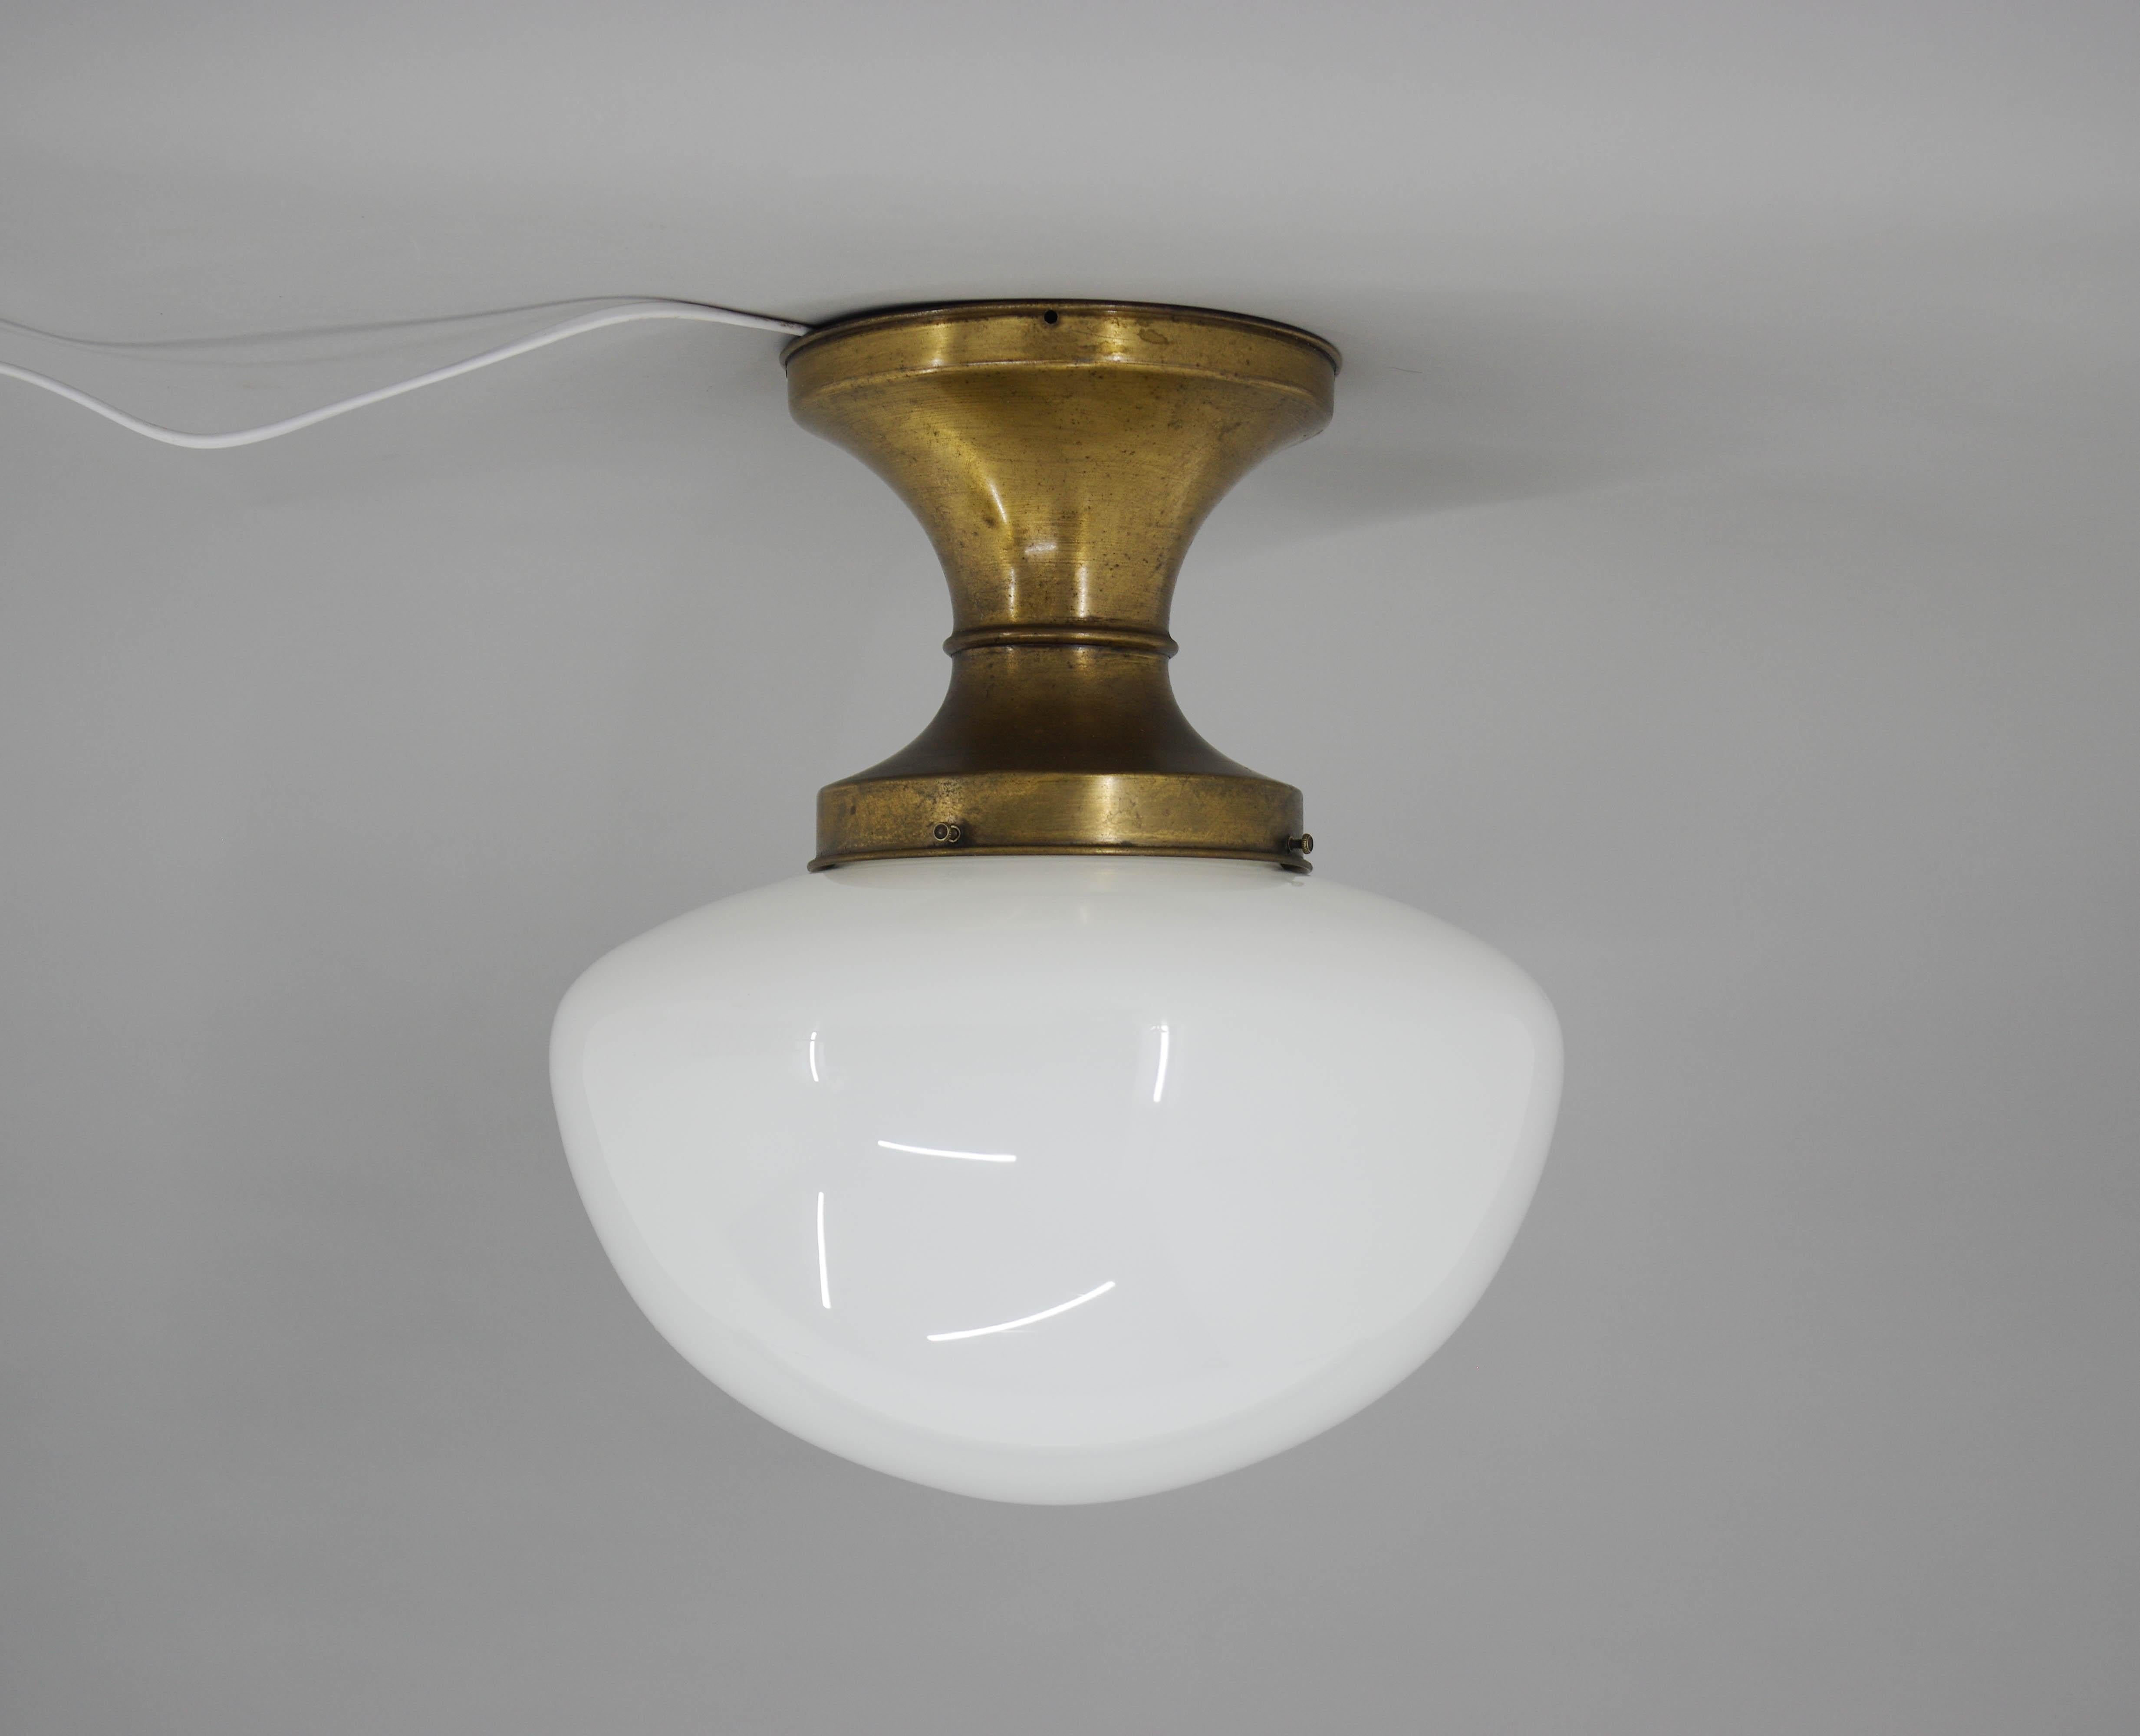 Big Art Nouveau flush mount made of lacquered brass and opaline glass.
Brass with nice age patina.
Glass in perfect condition.
Rewired: 1x60W, E25-E27 bulb
US wiring compatible